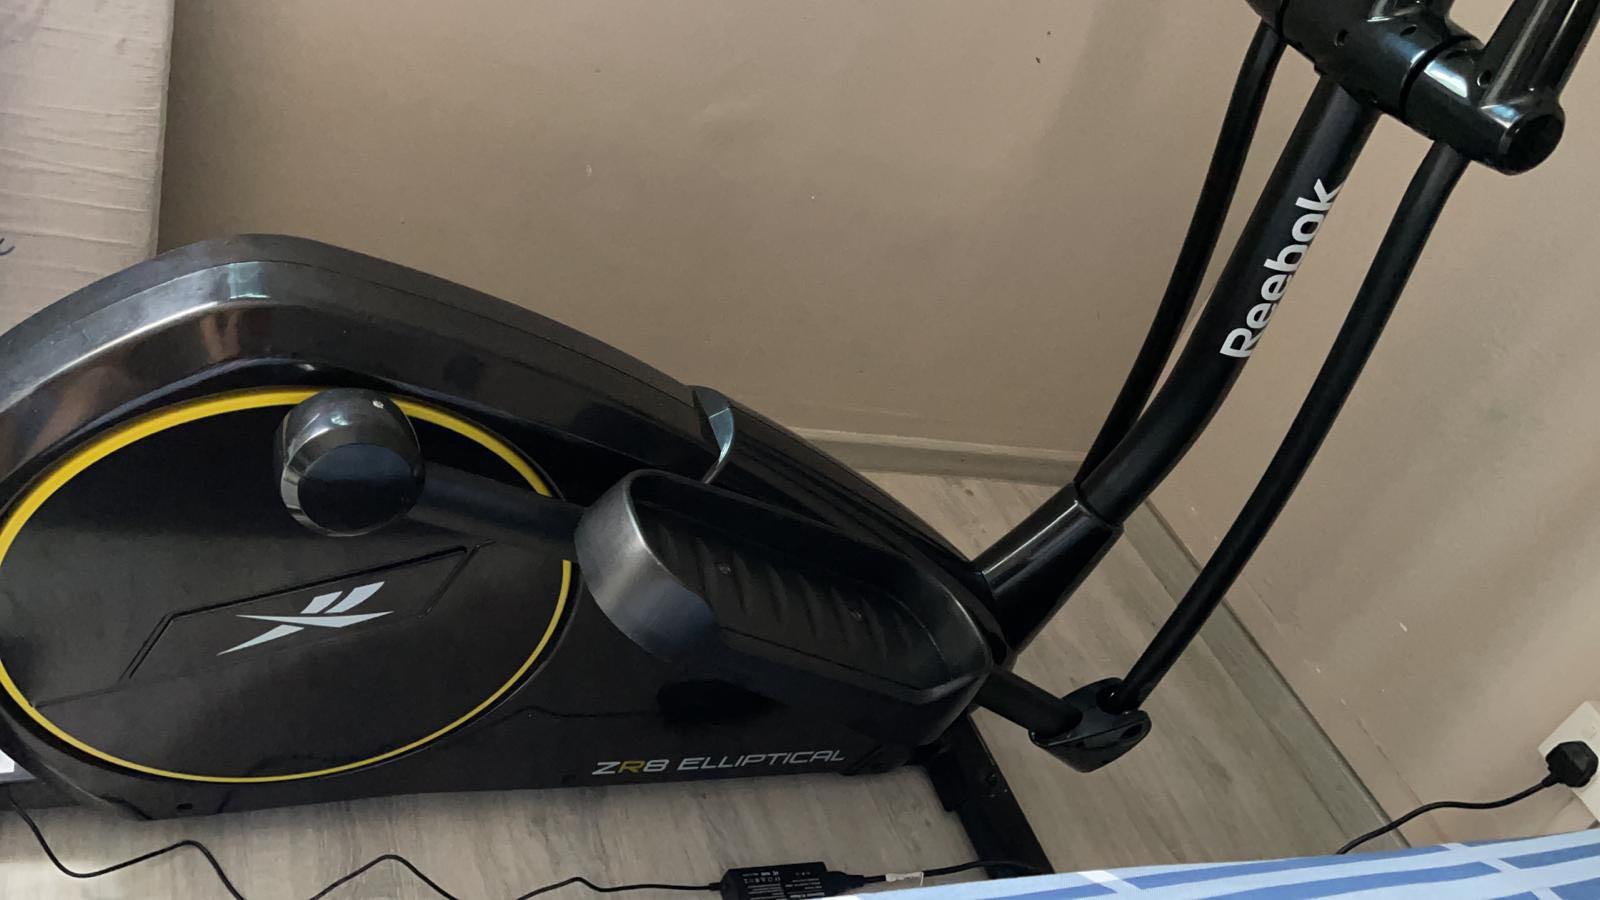 Reebok ZR8 elliptical trainer, Sports Exercise & Fitness, Cardio & Fitness Machines on Carousell